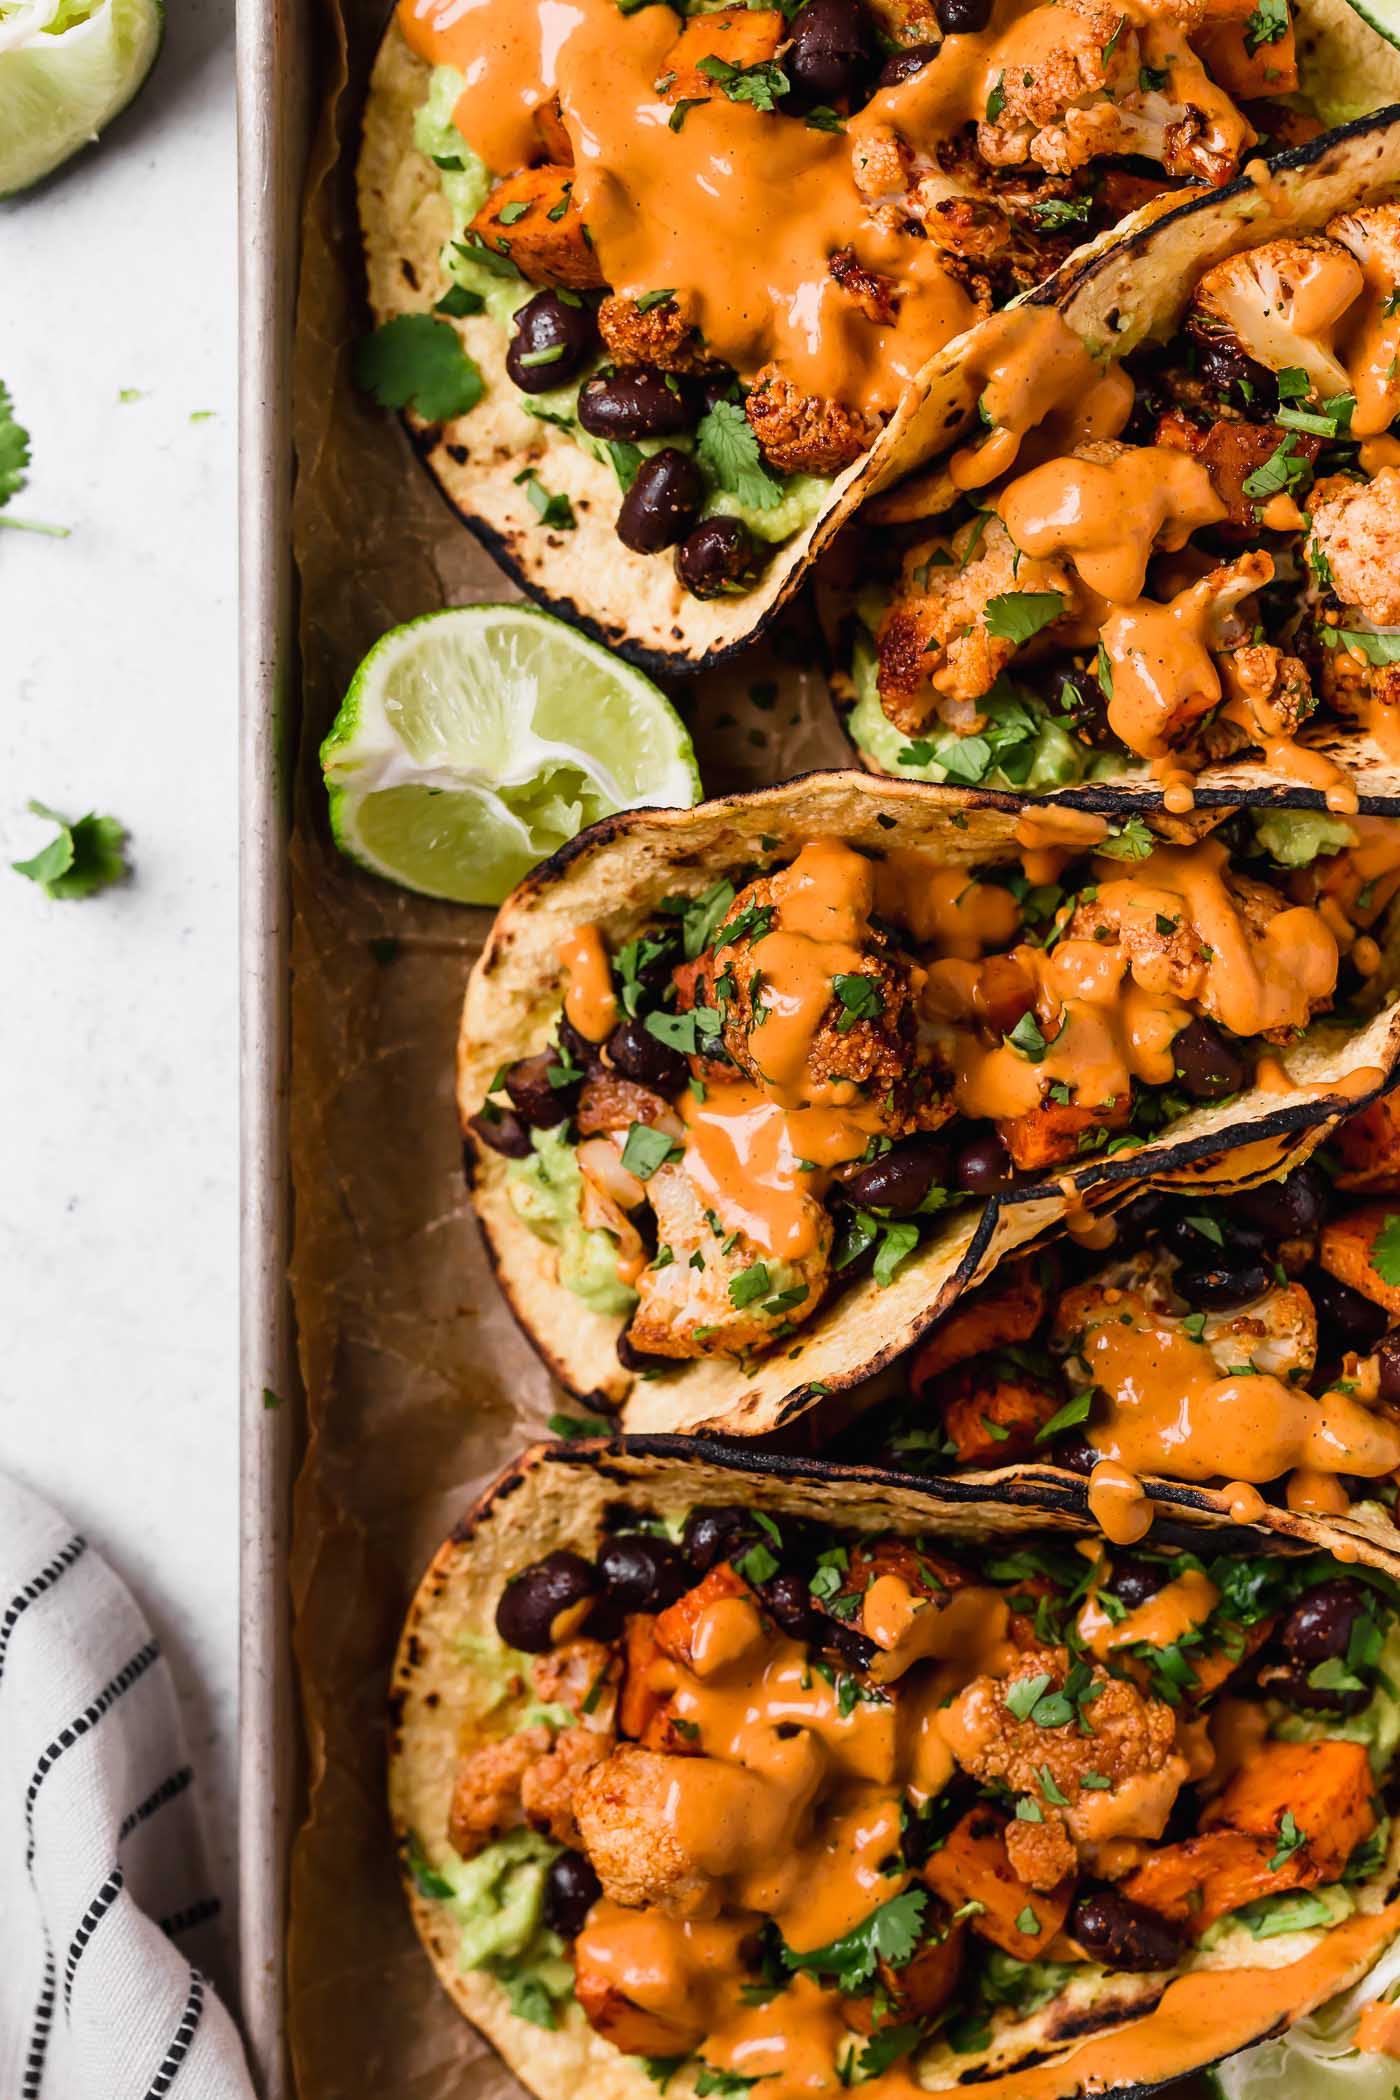 Roasted Sweet Potato and Cauliflower Tacos with Chipotle Cashew Crema